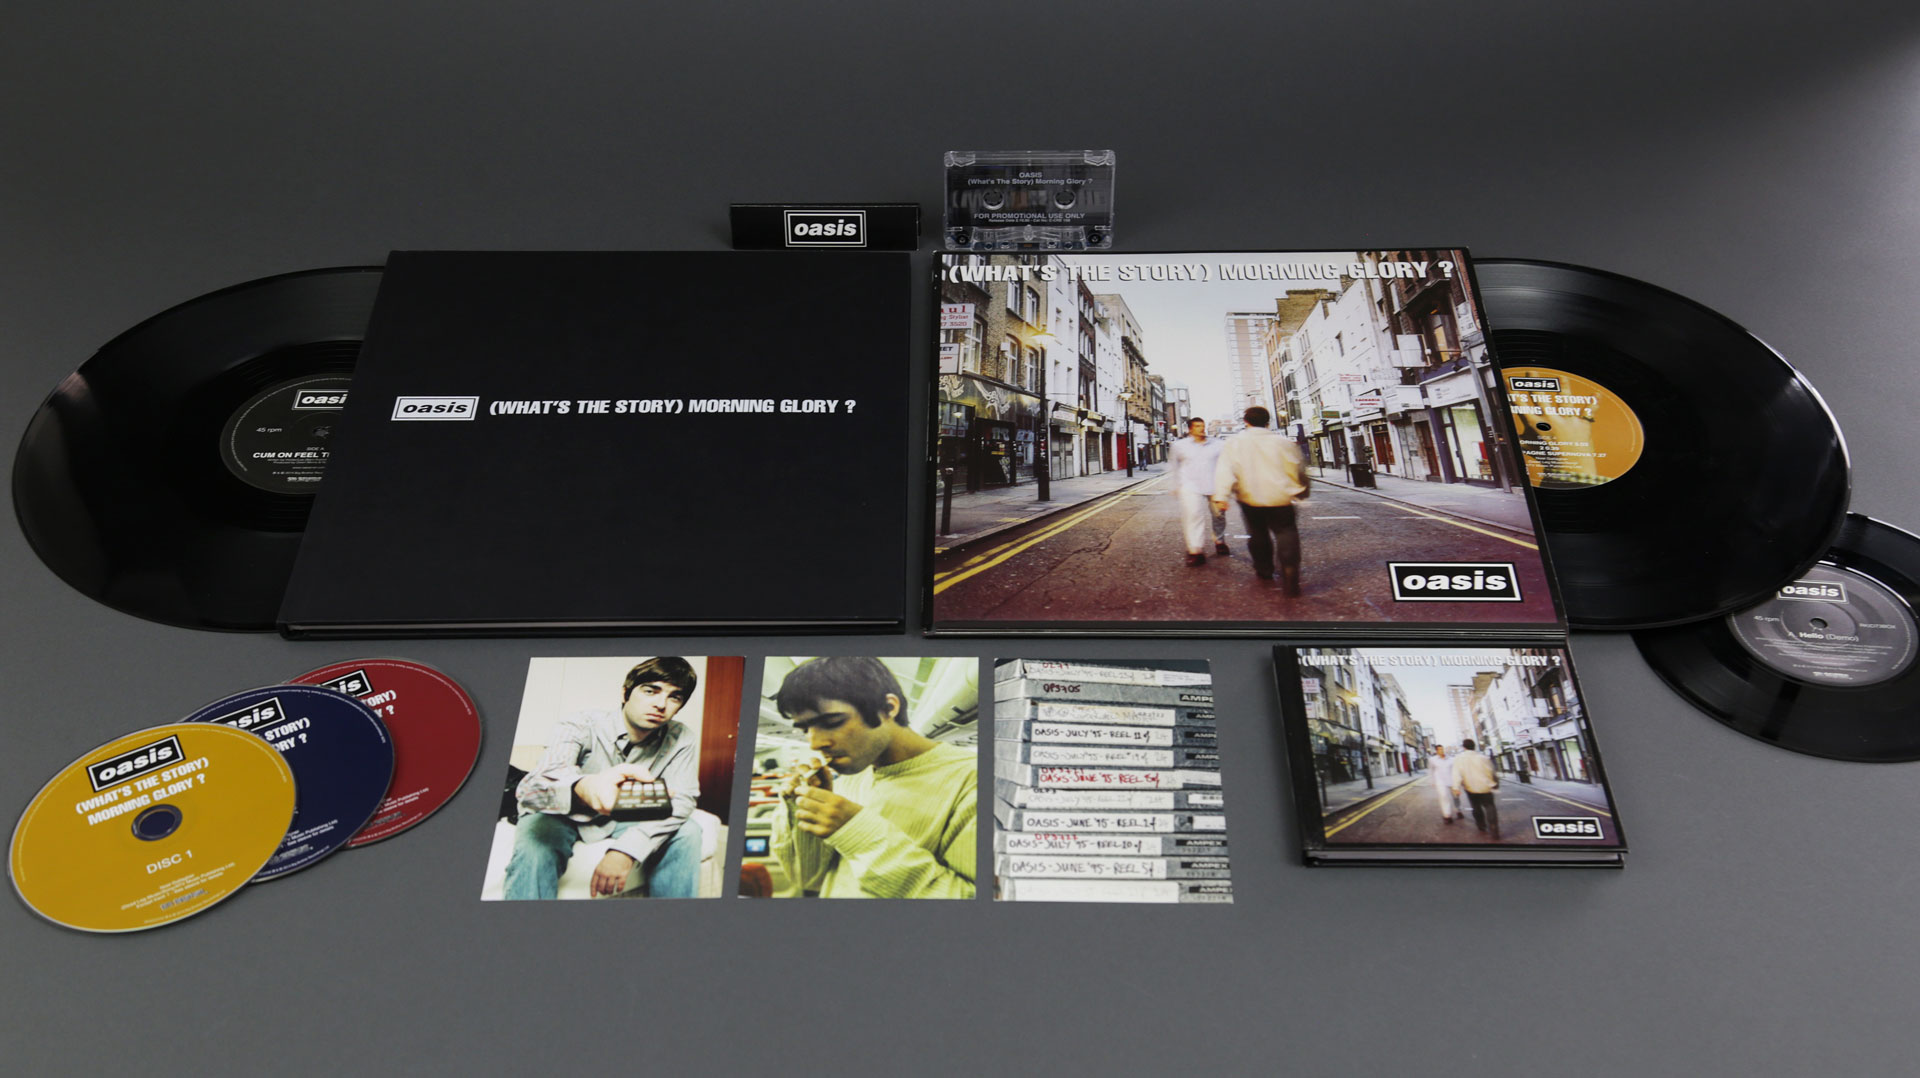 Oasis - '(What's Story) Morning Glory?' Deluxe Box Set